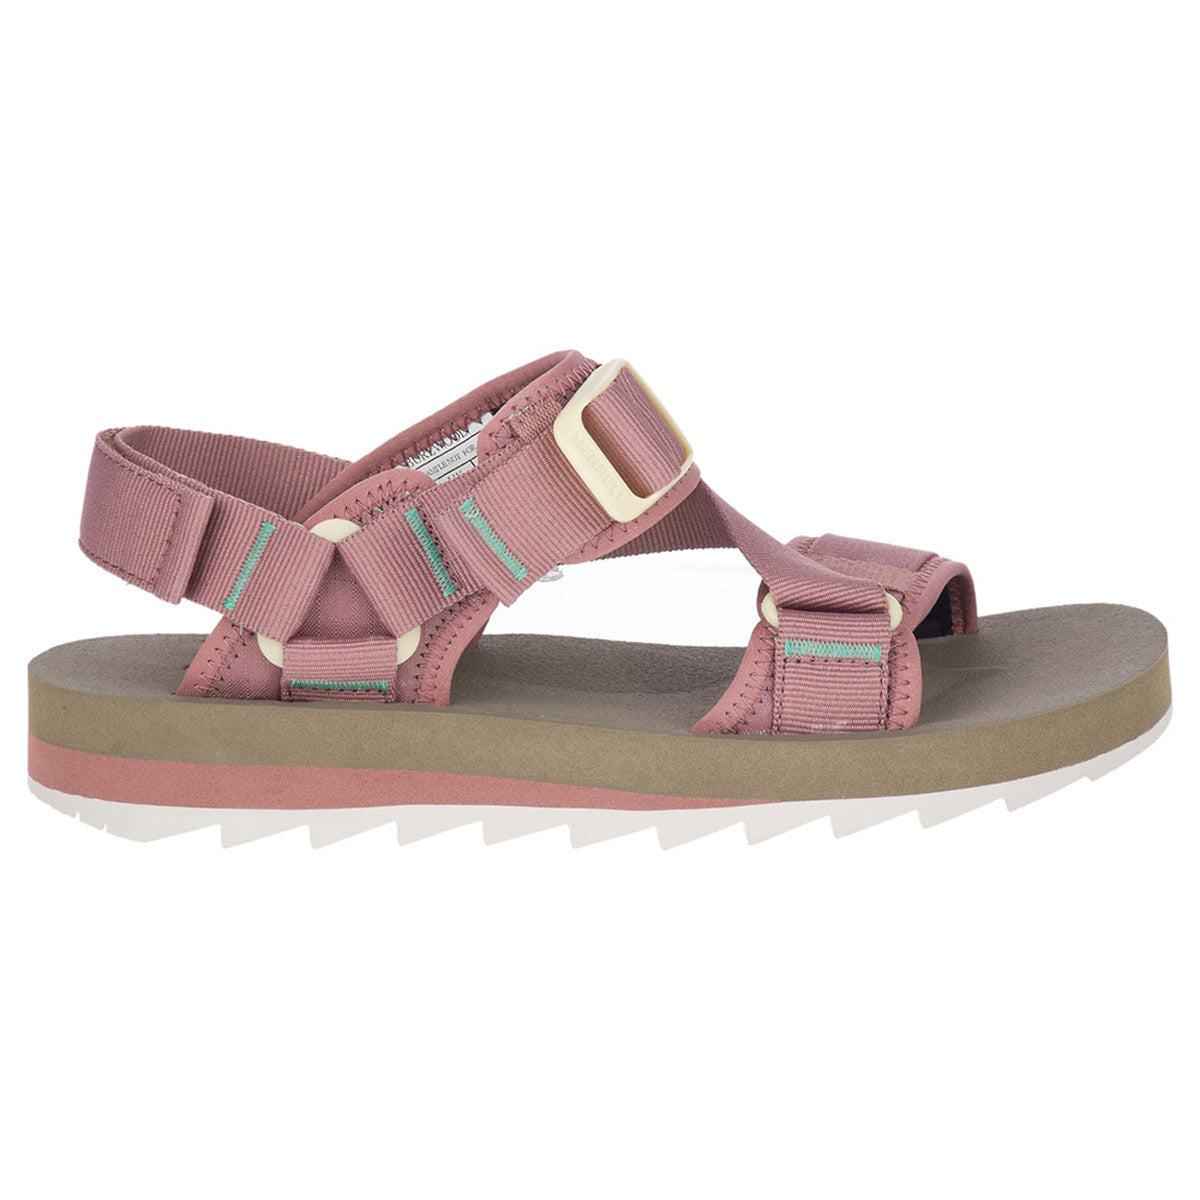 A single sporty Merrell women's Alpine Strap Burlwood sandal with adjustable straps and a contoured sole.